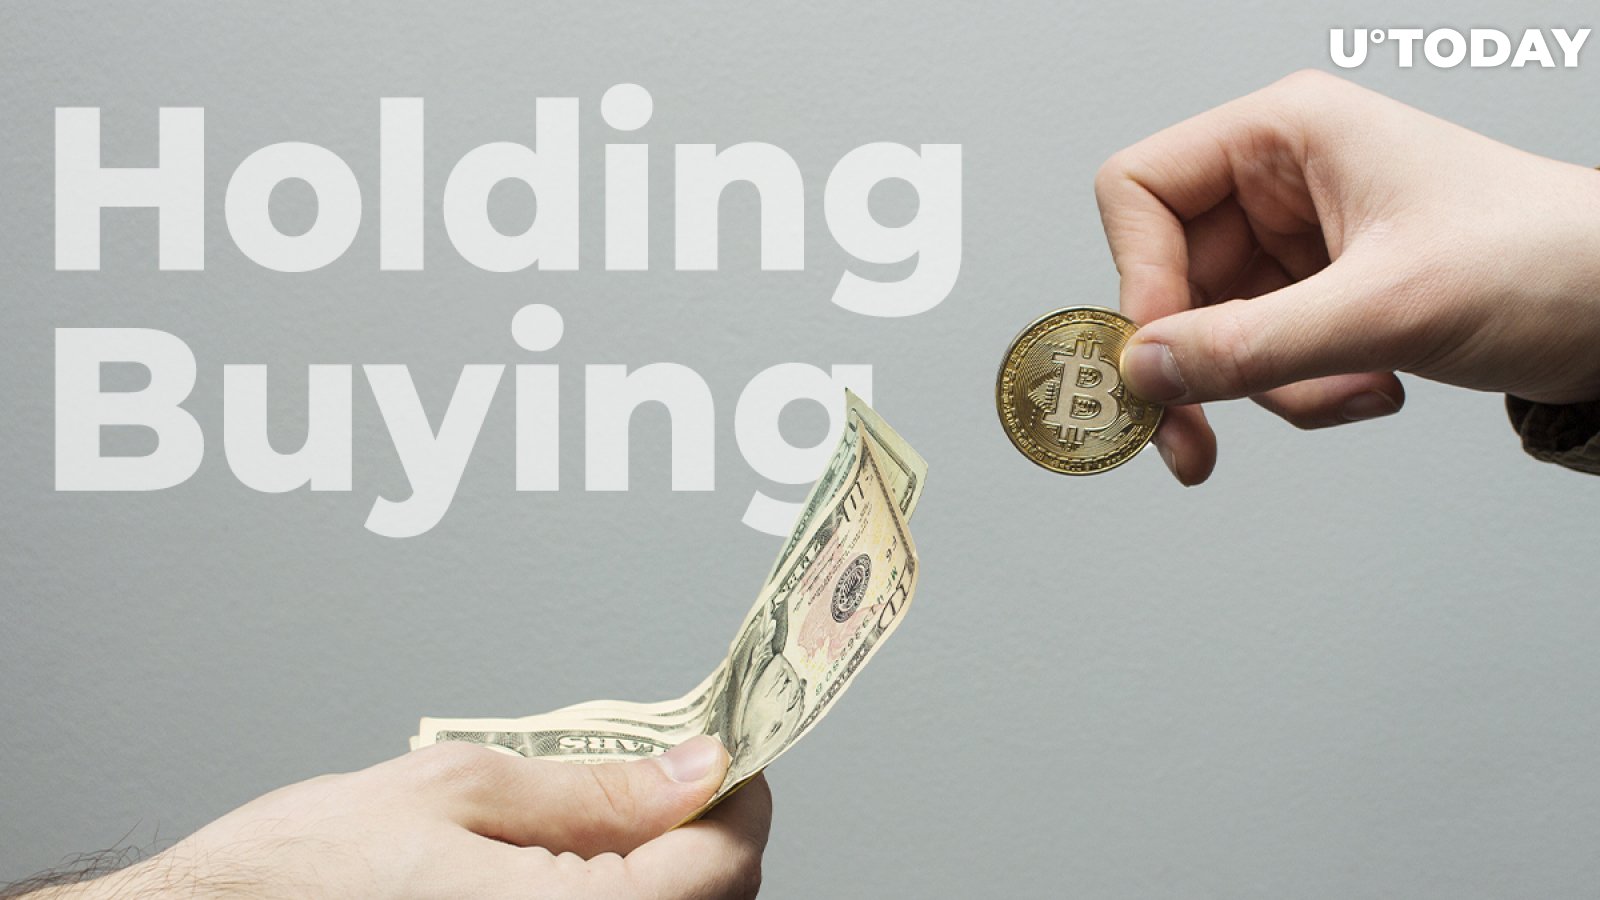 84% Poll Respondents Holding/Buying Bitcoin: Plan B Analyst